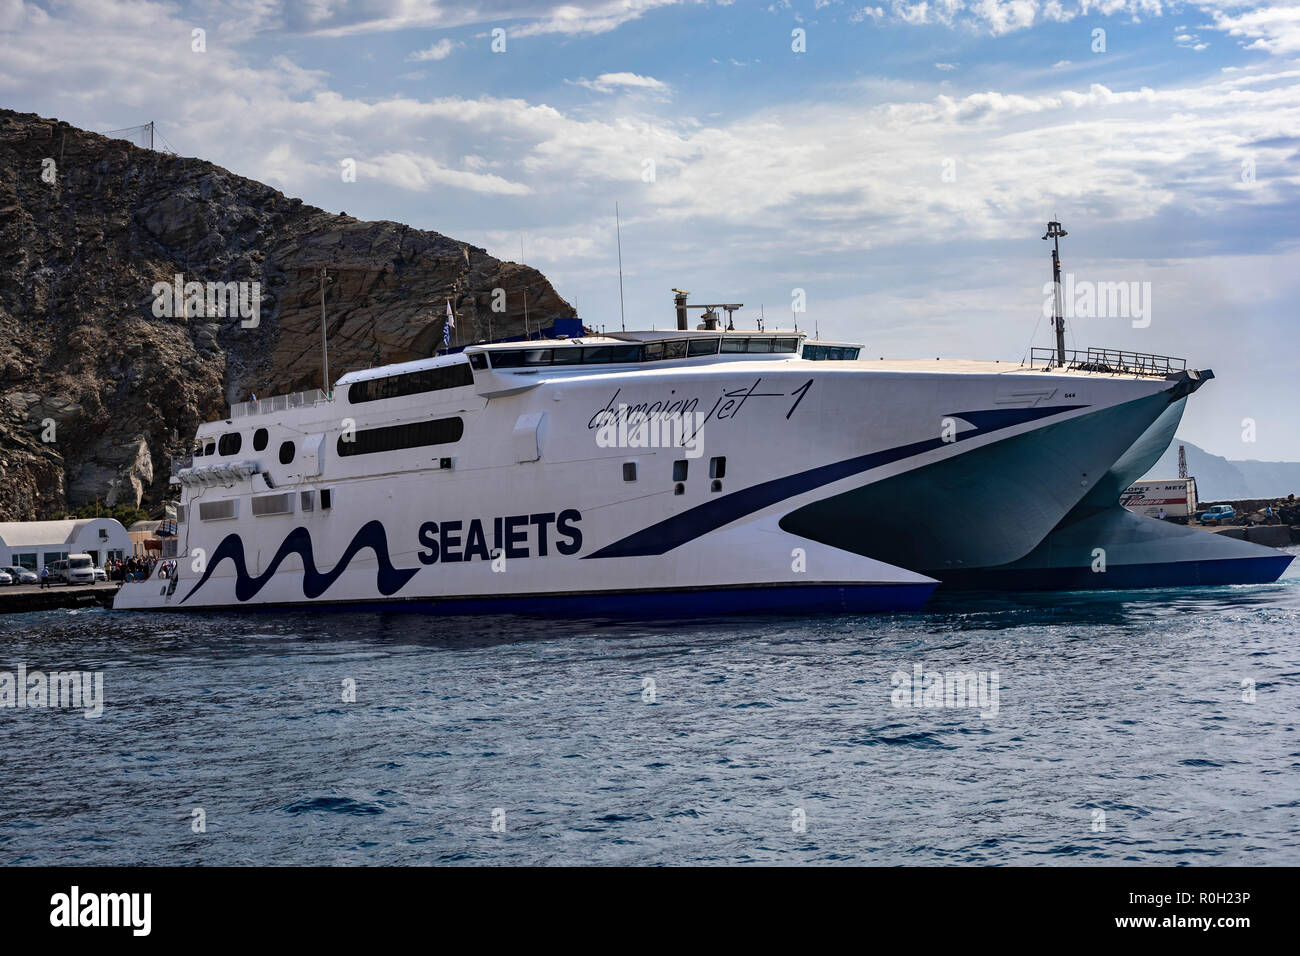 snyde bleg æggelederne Seajets Champion Jet 1 Catamaran docks in Athinios Port (Αθηνιός) the  primary ferry port of Santorini, located approximately 10 km south of the  capita Stock Photo - Alamy